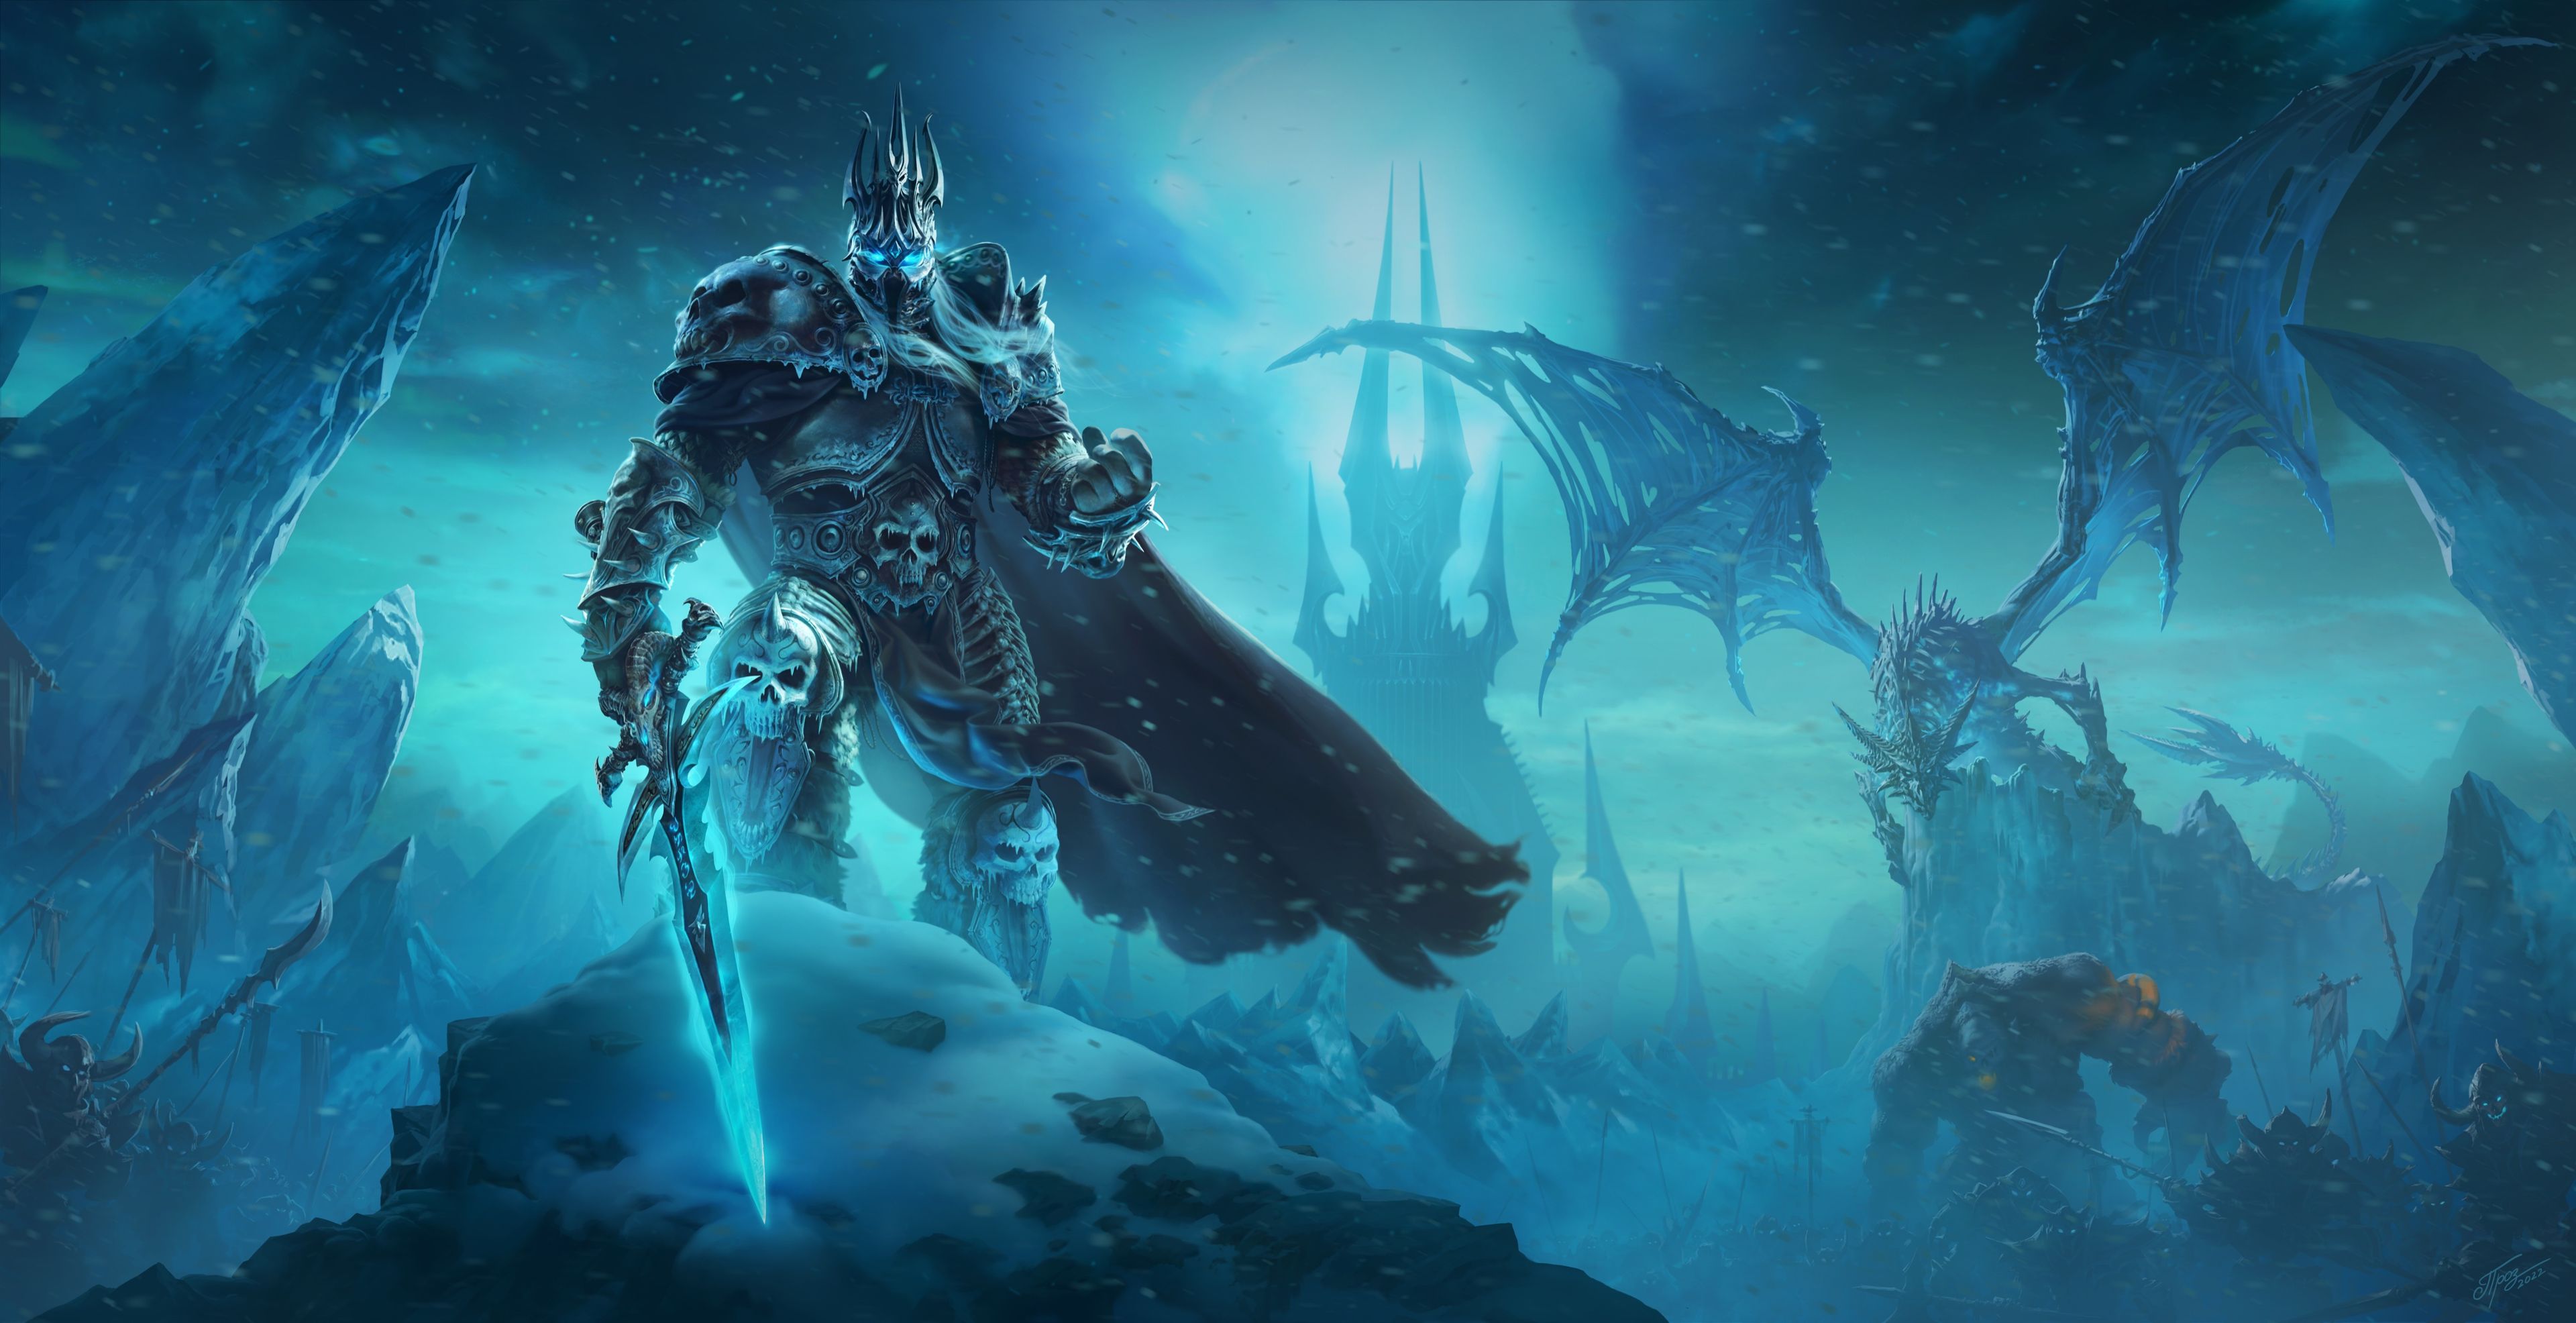 World of Warcraft Classic Wrath of the Lich King